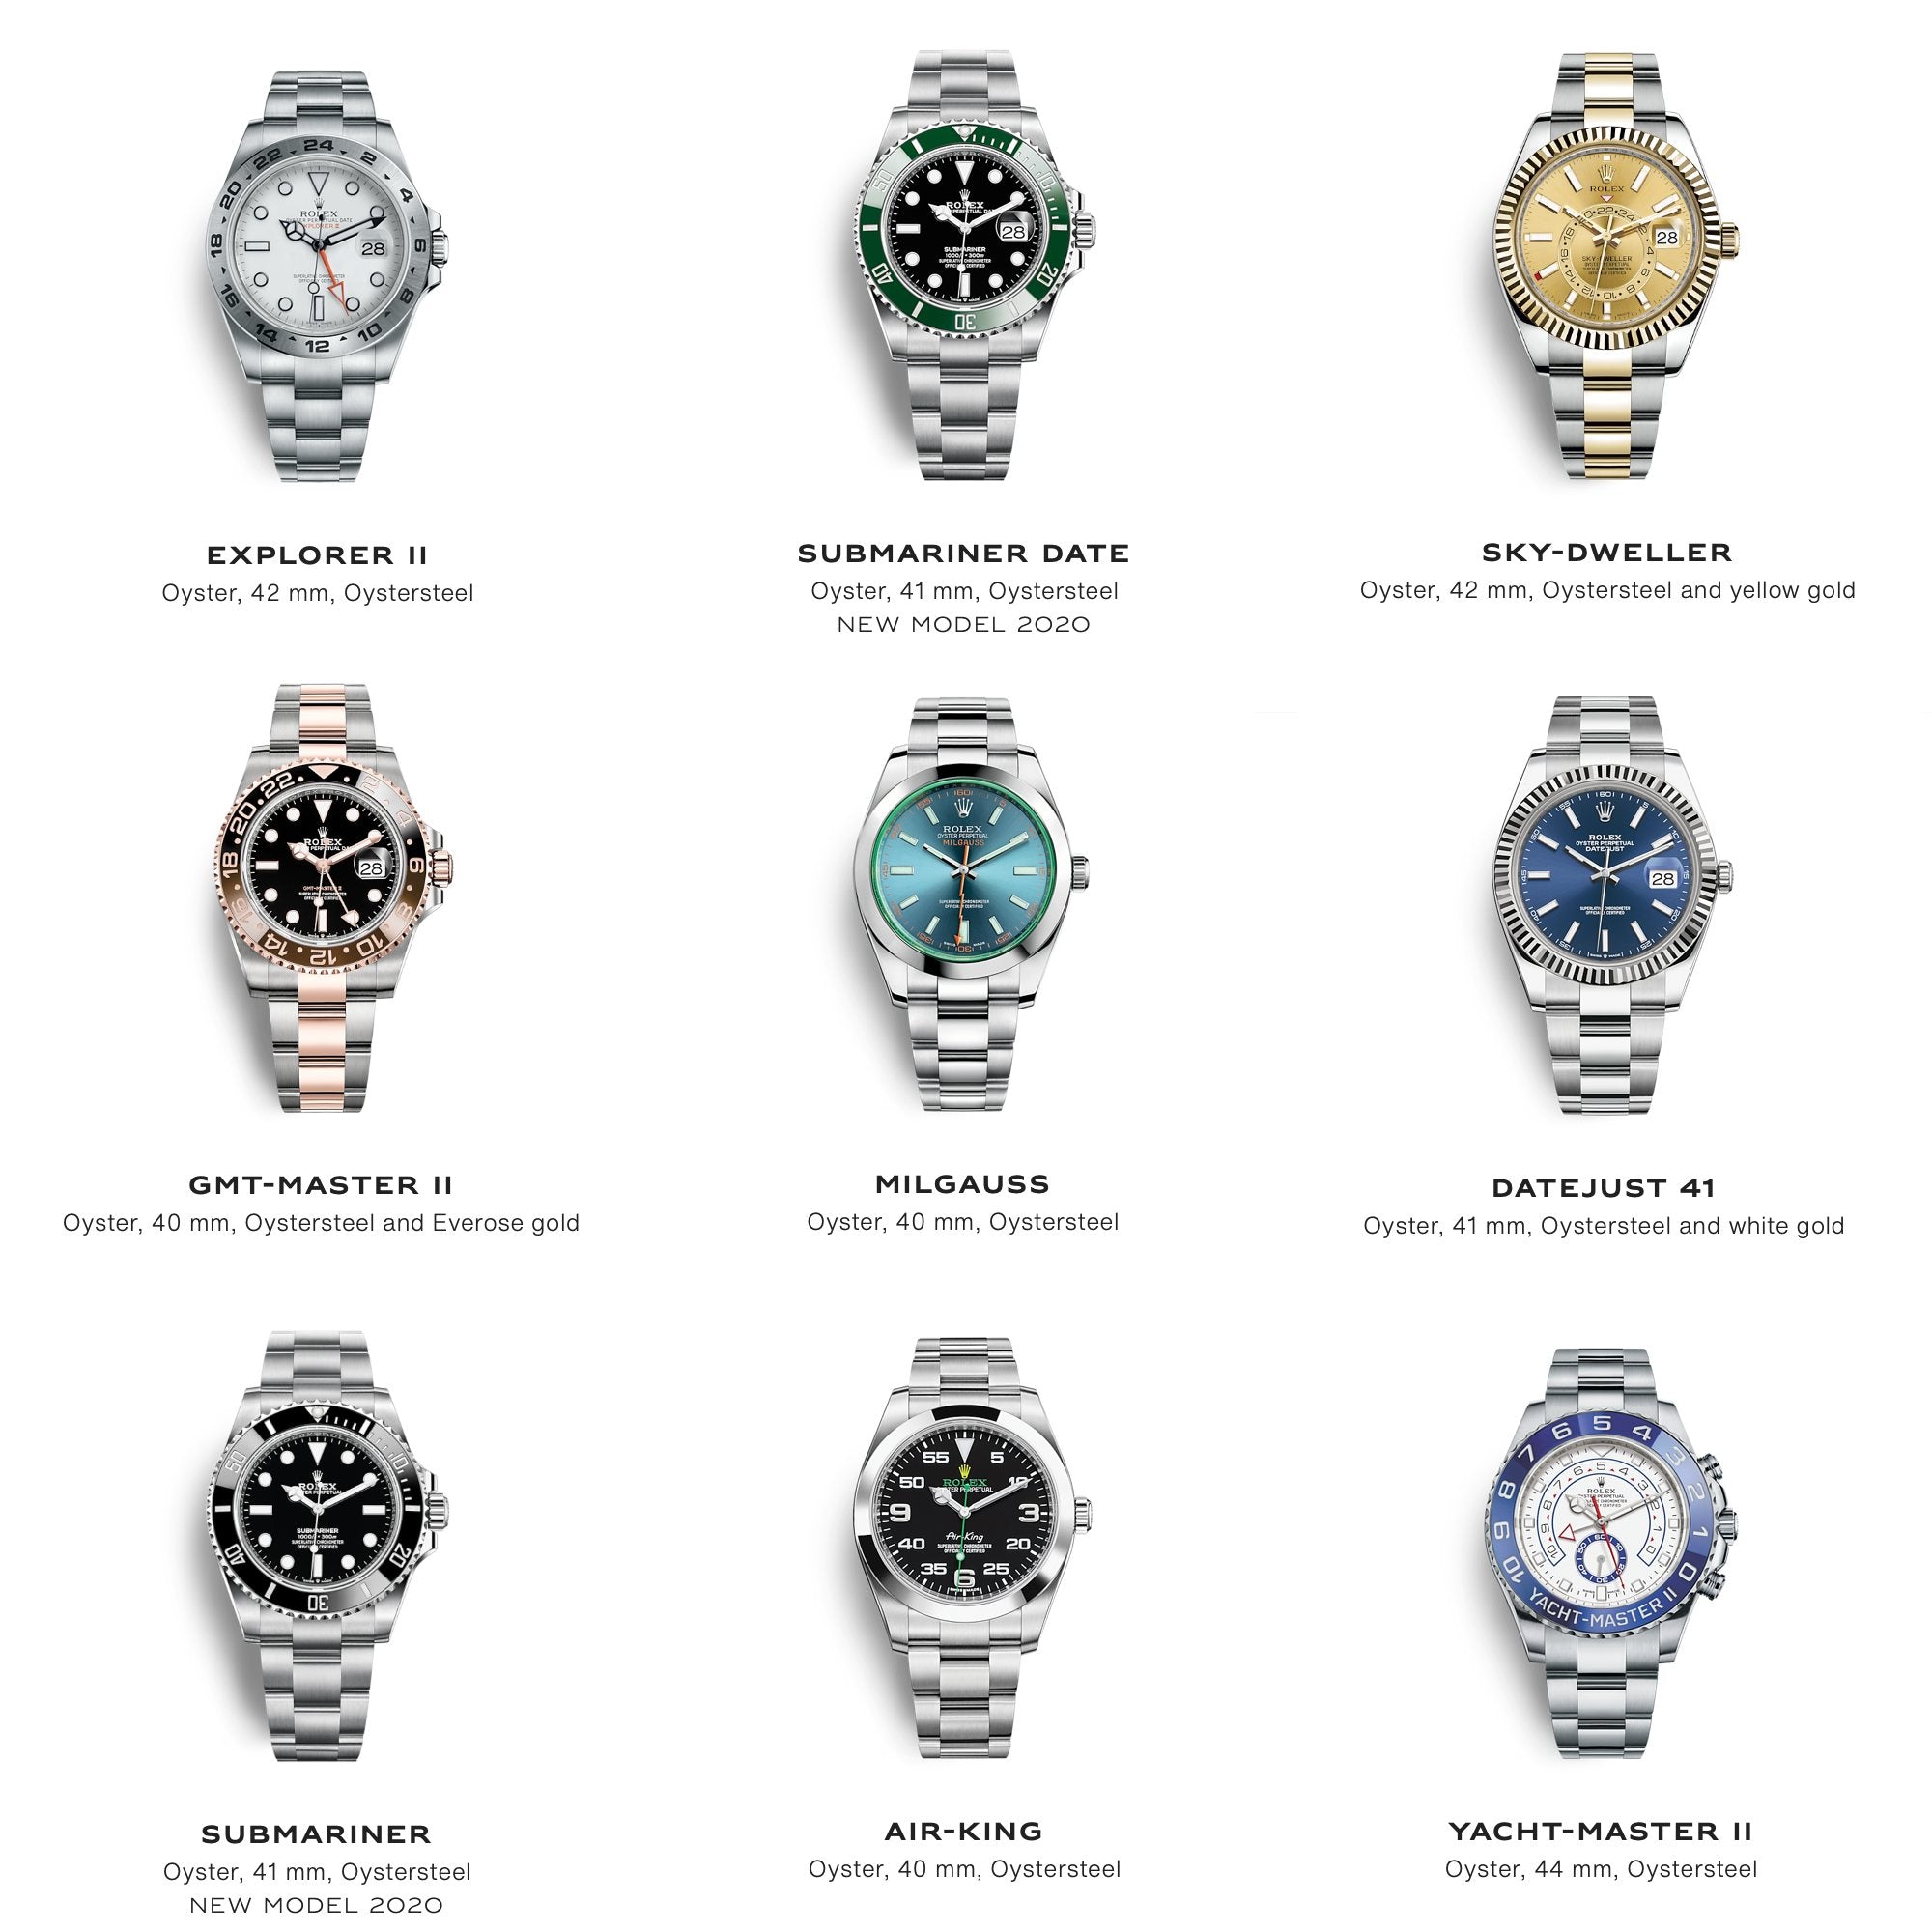 Modern Rolex Watches: Guide to Buying a New Watch